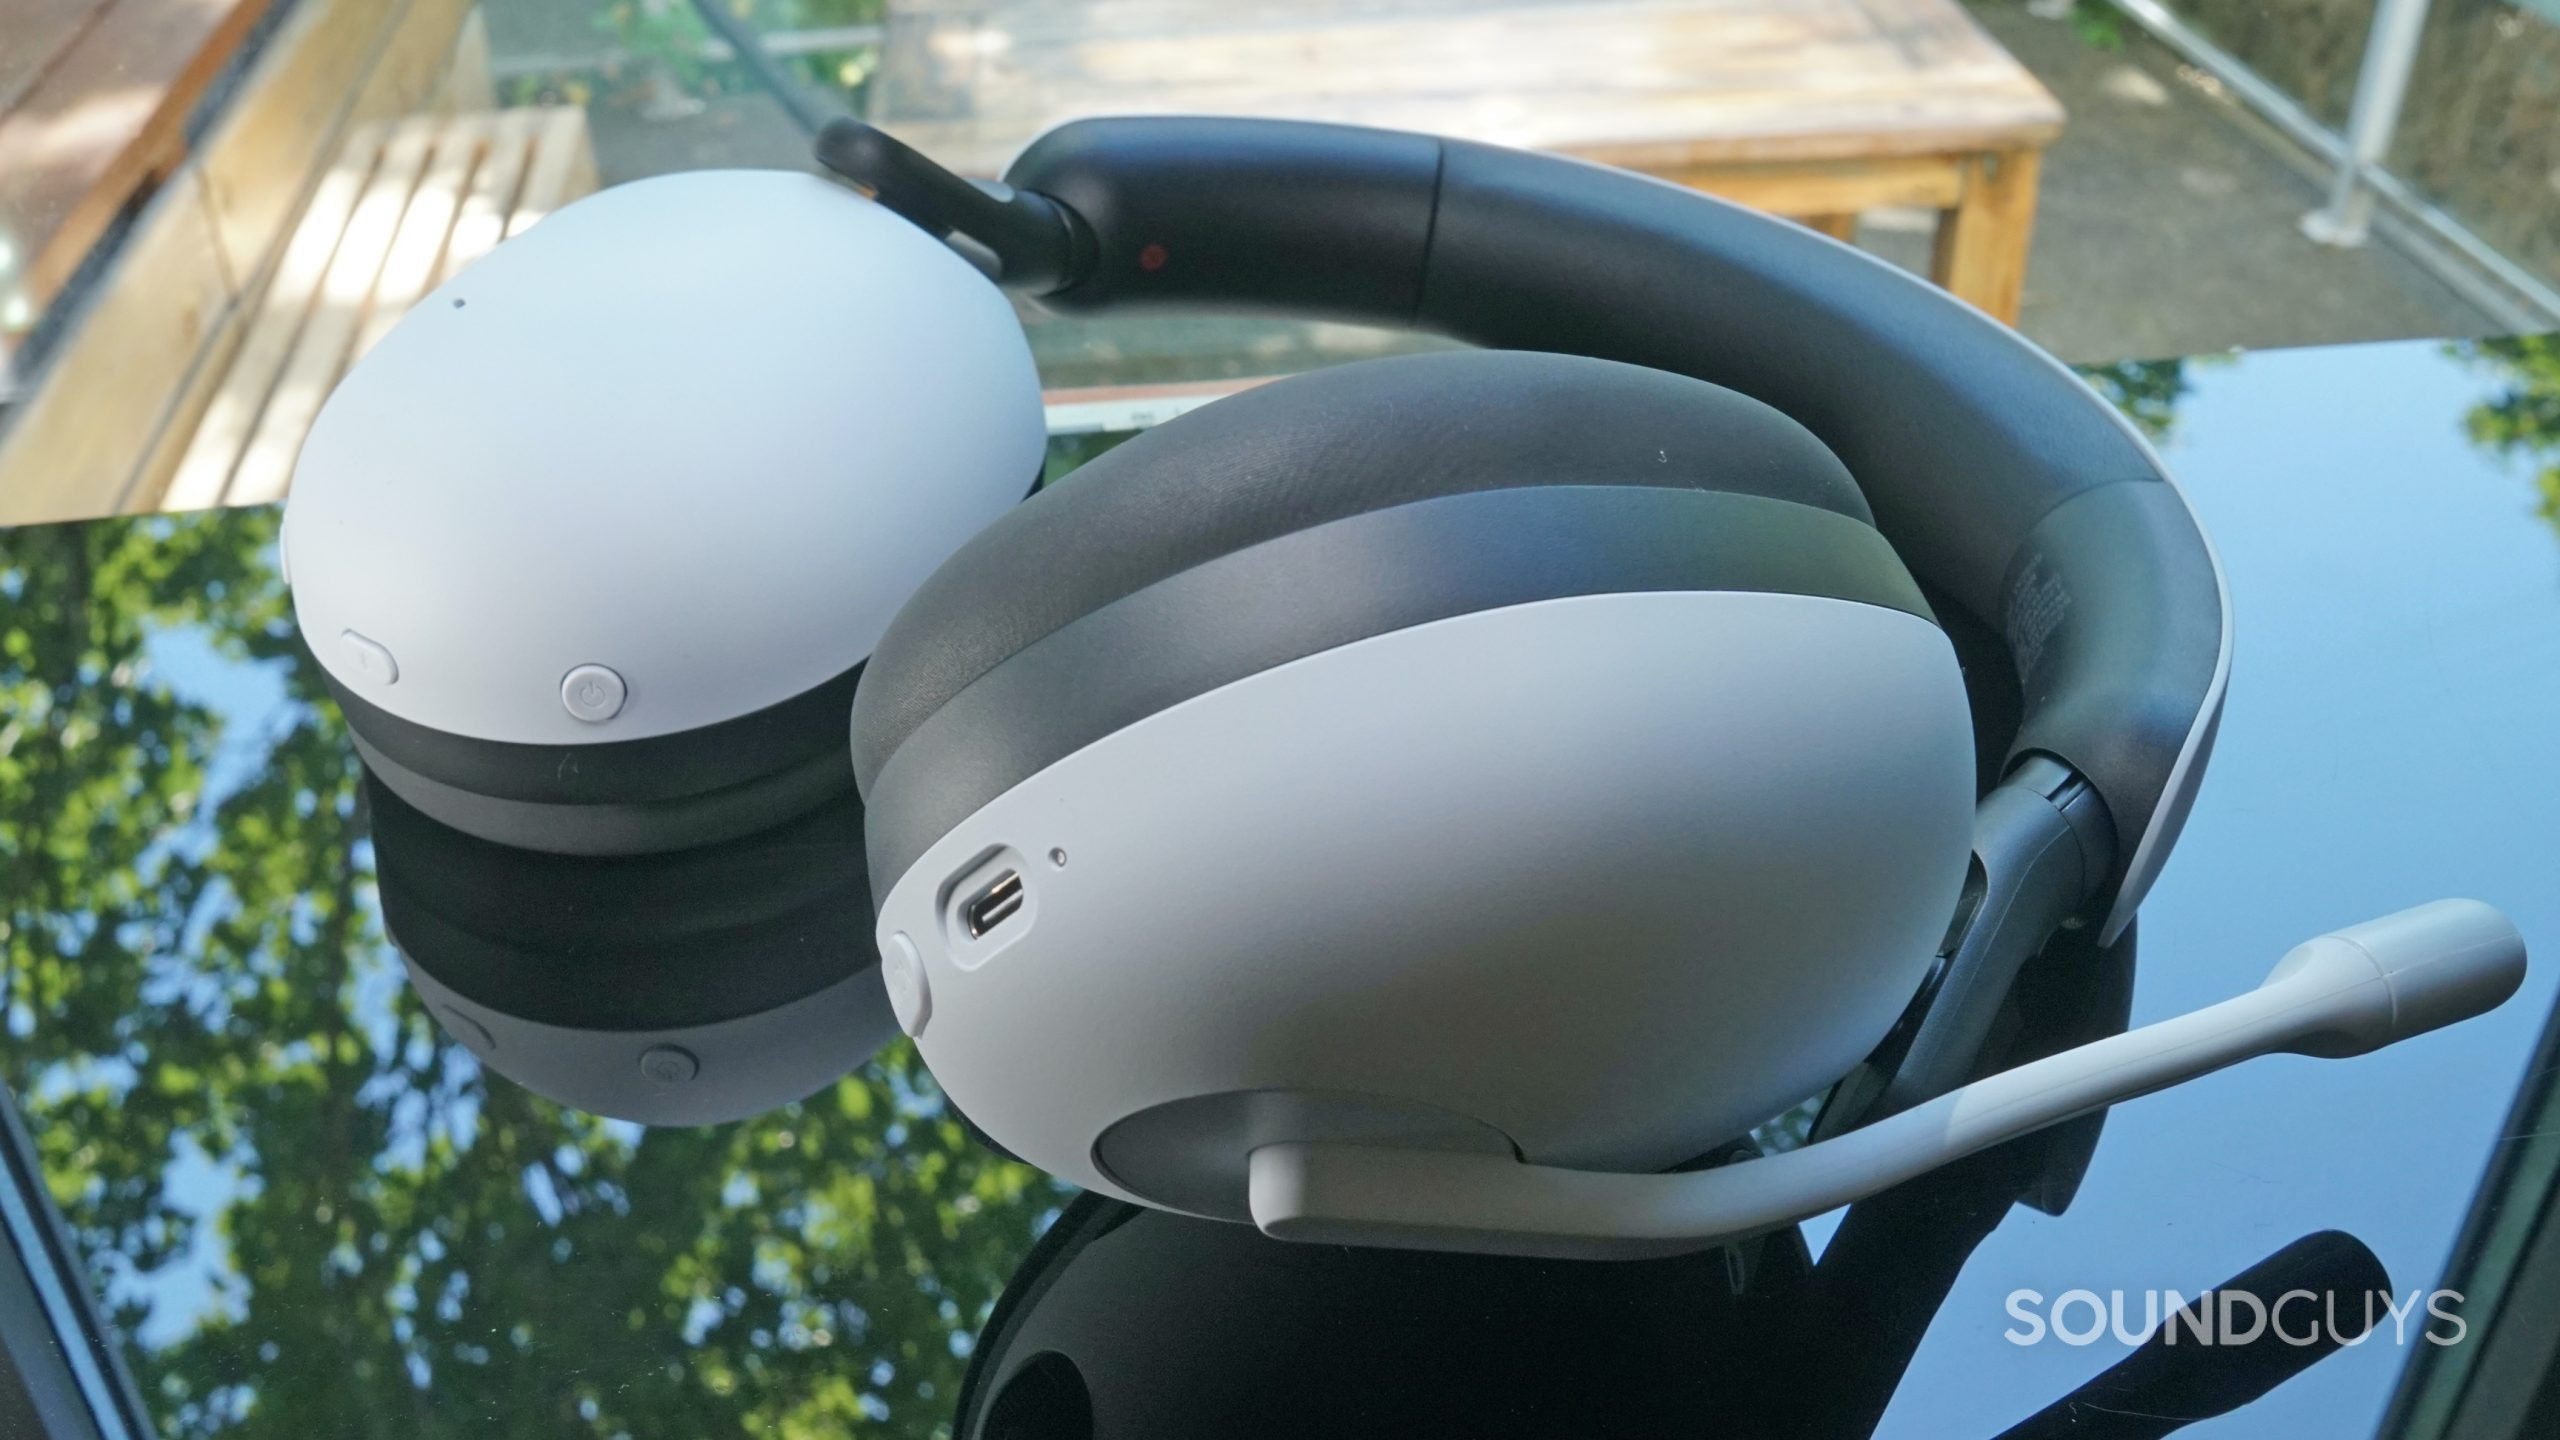 The Sony Inzone H9 gaming headset lays on a reflective surface next to a window on a sunny day. Charging port and buttons are visible